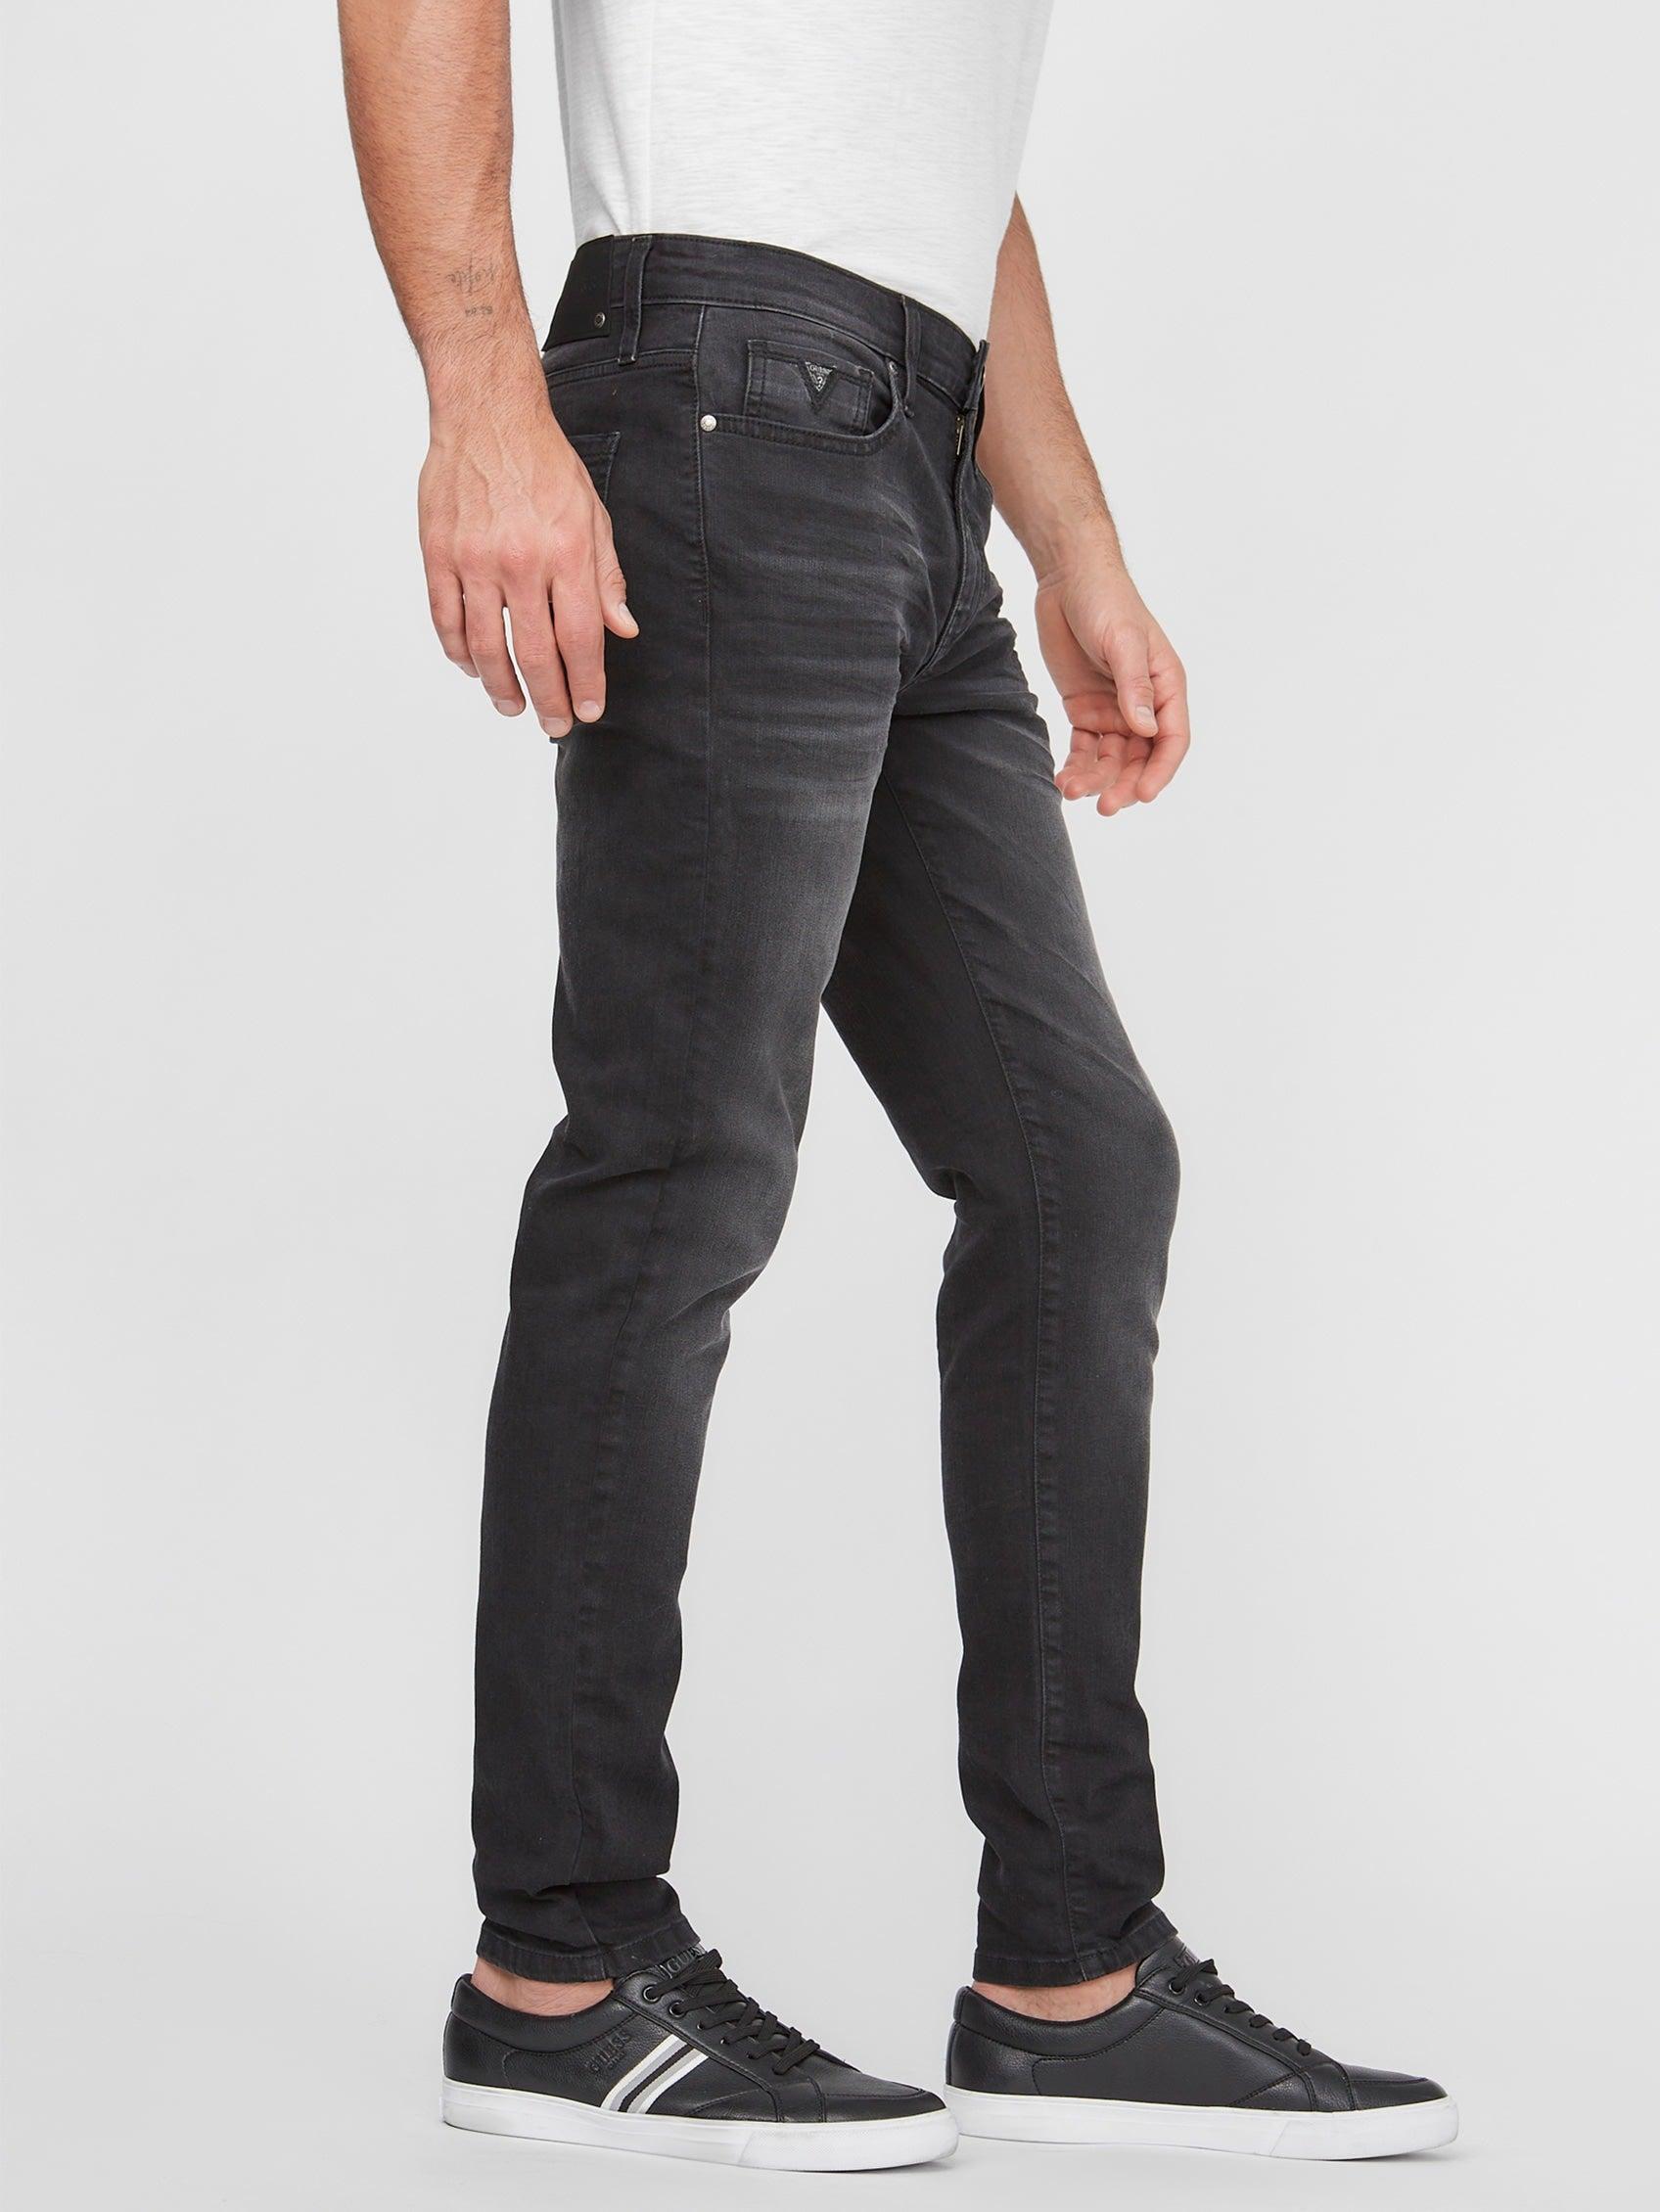 Guess Factory Avalon Modern Skinny Jeans in Black for Men | Lyst